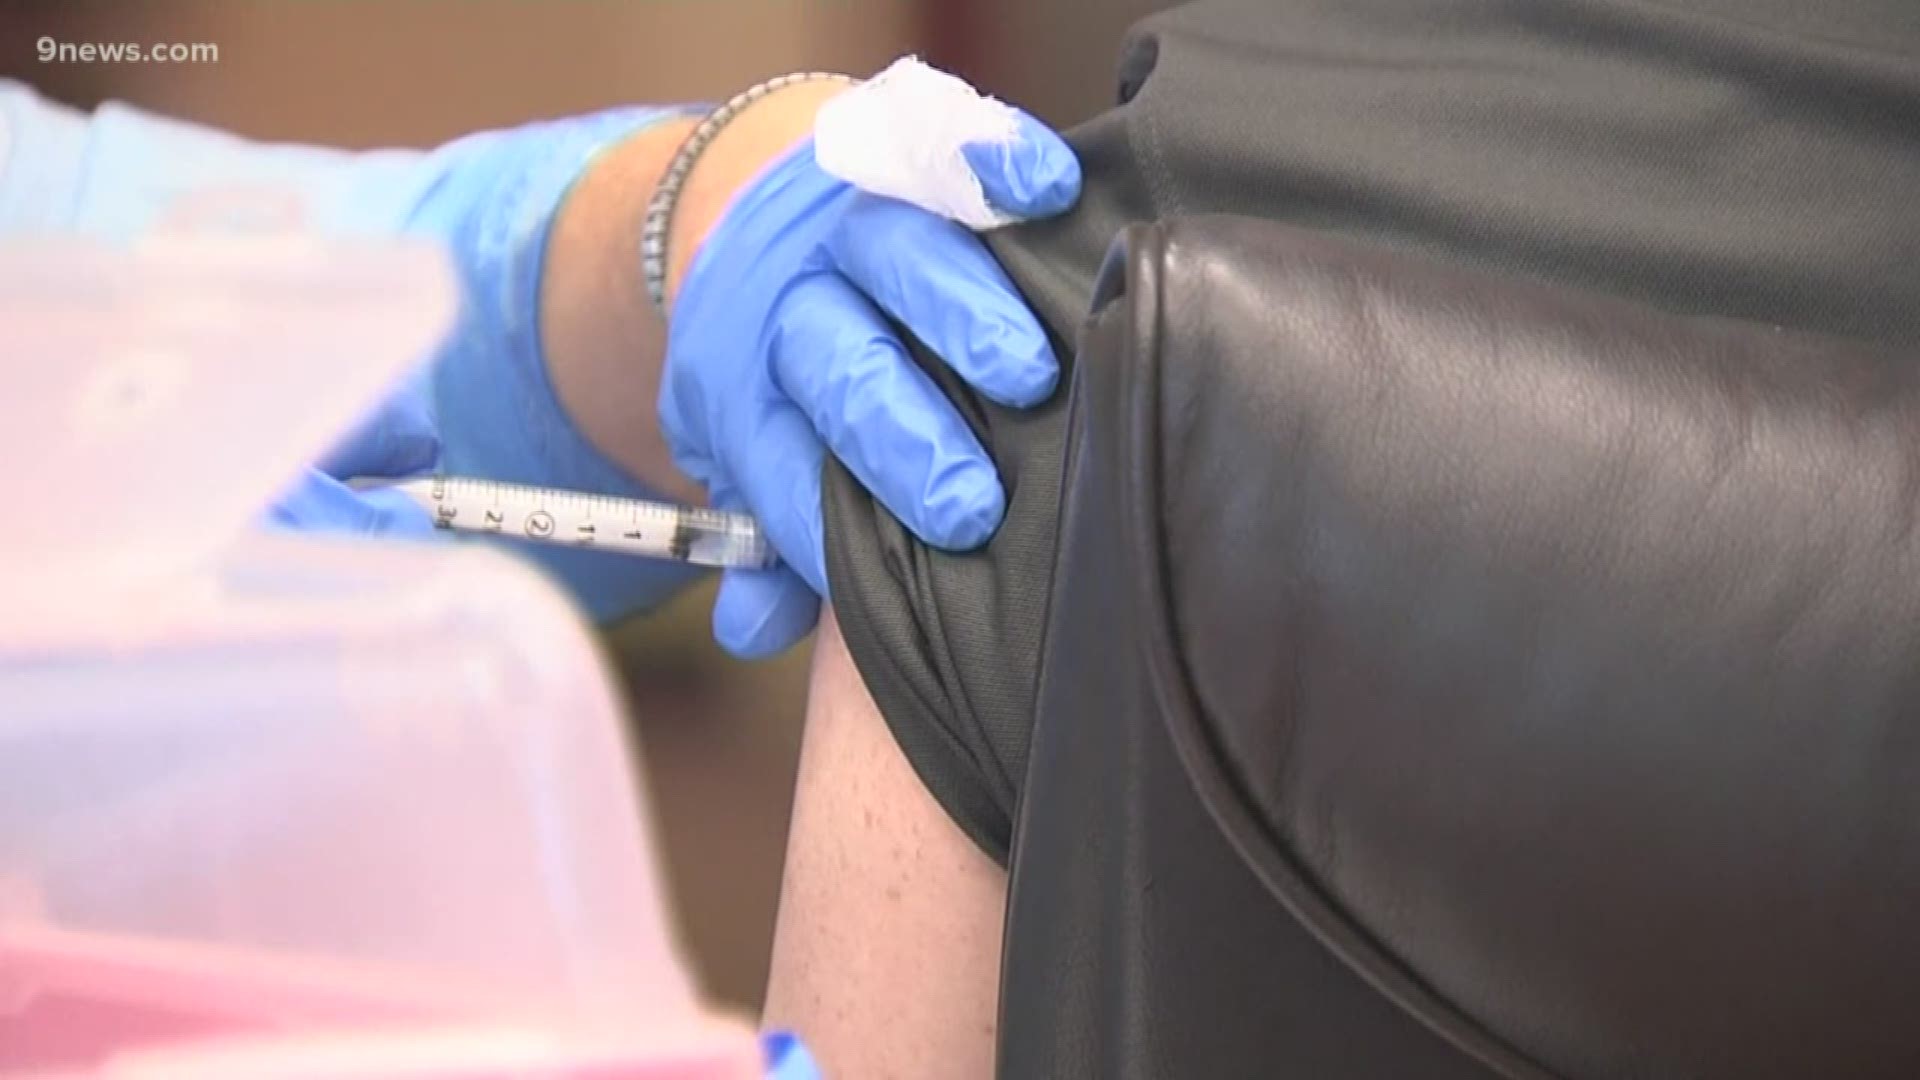 A doctor from Childen's Hospital Colorado discusses the flu shot and why it's important to get the vaccine before the end of October.